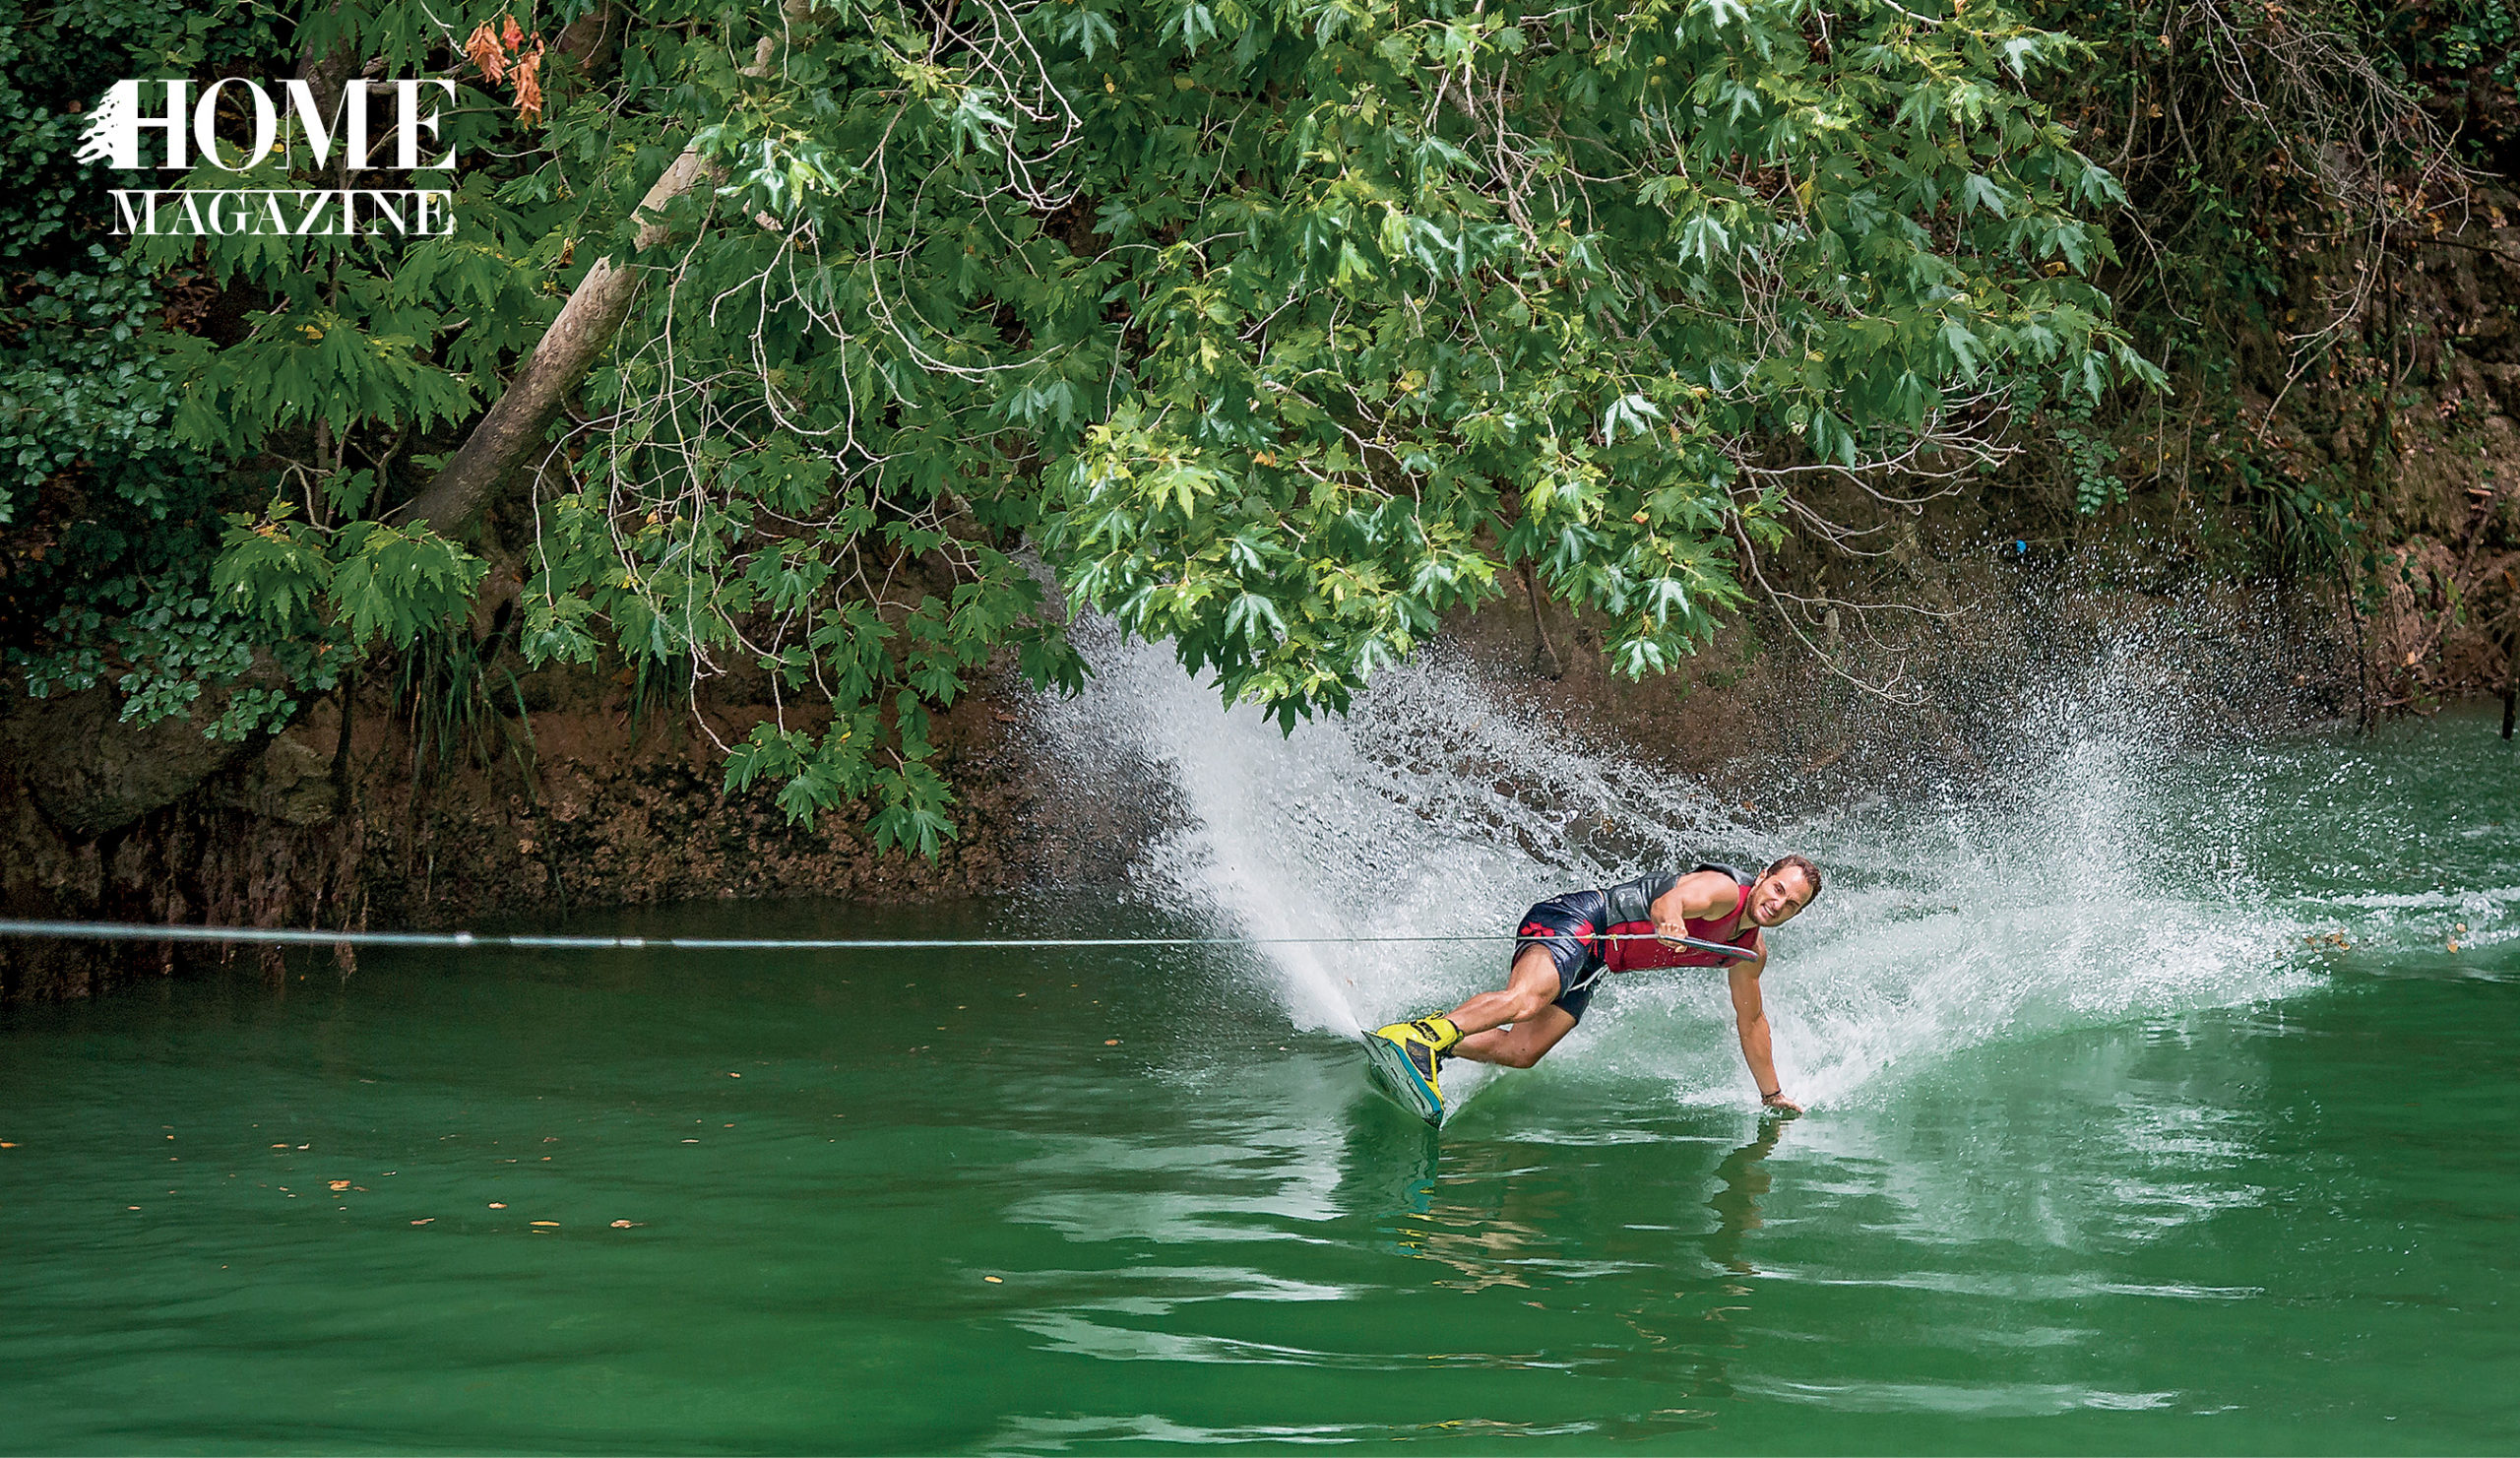 Man water surfing amidst green trees